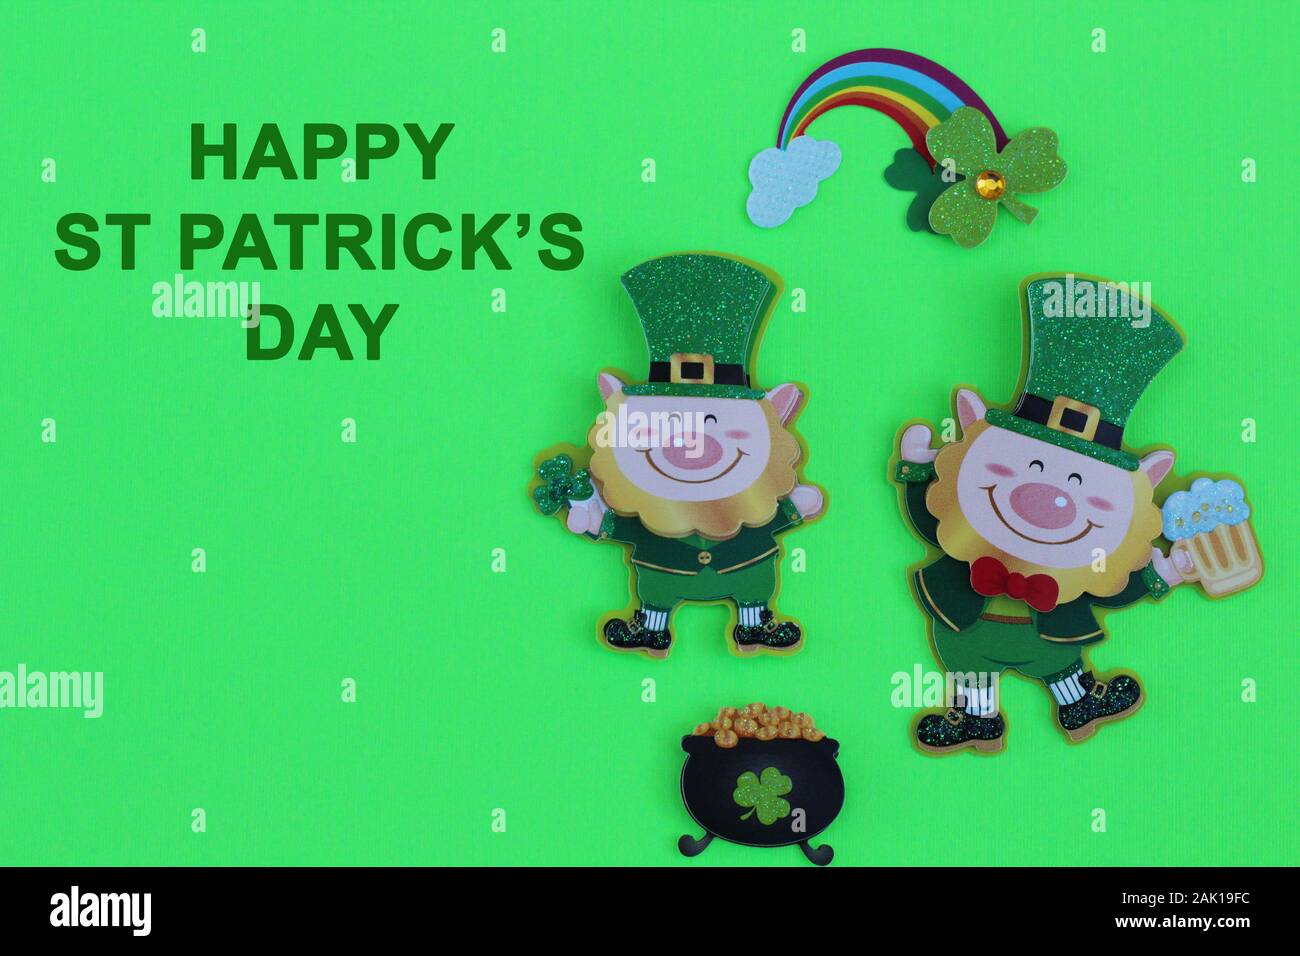 leprechauns holding mug of beer next to a black pot of gold and a rainbow with happy st Patricks day in green text on a green background Stock Photo